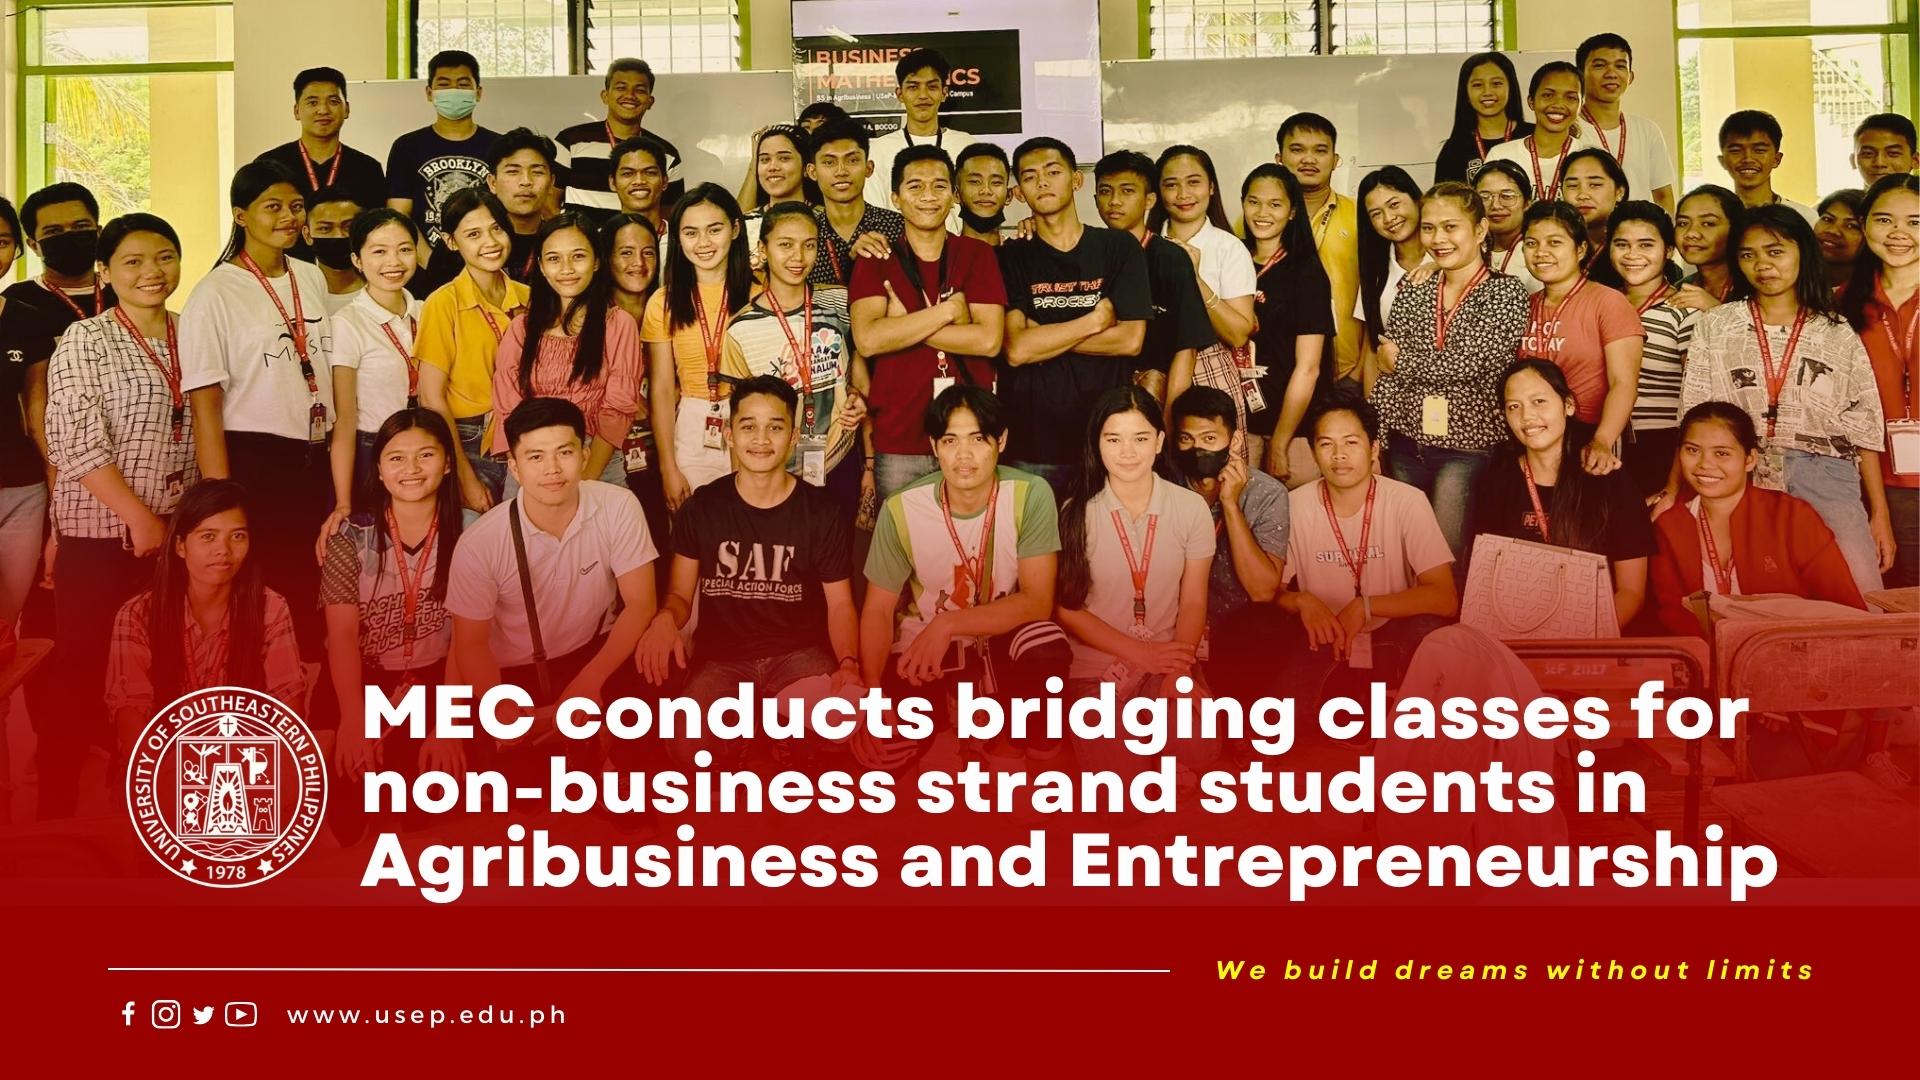 MEC conducts bridging classes for non-business strand students in Agribusiness and Entrepreneurship